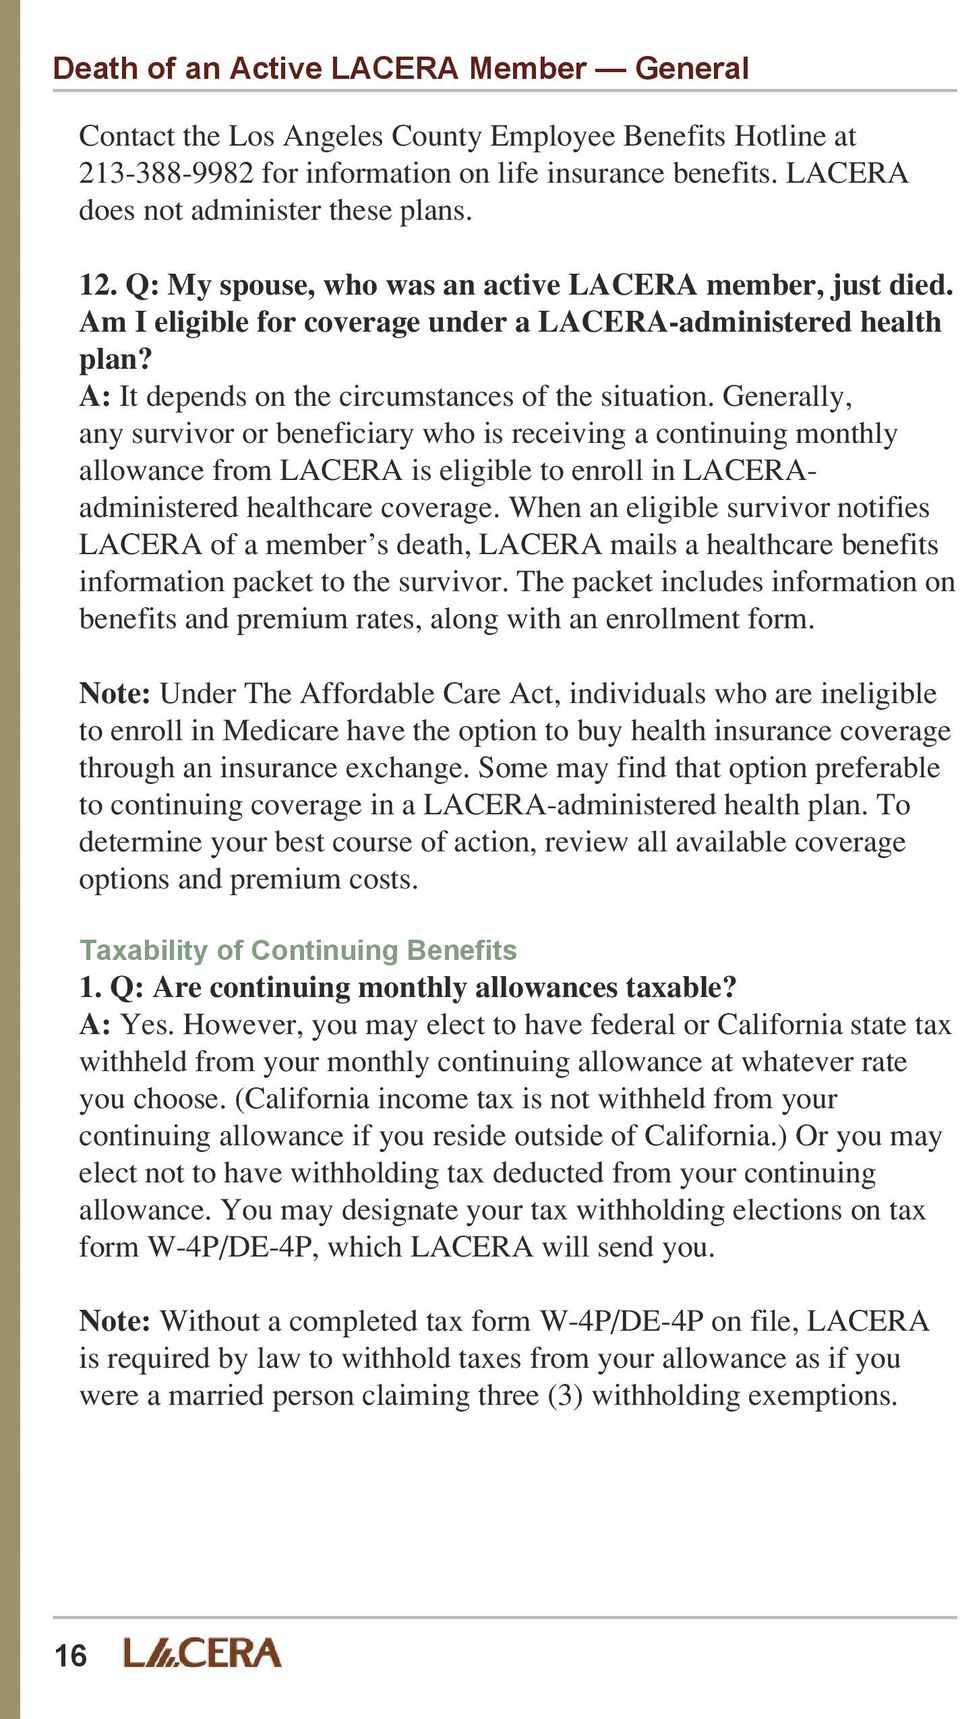 Generally, any survivor or beneficiary who is receiving a continuing monthly allowance from LACERA is eligible to enroll in LACERAadministered healthcare coverage.